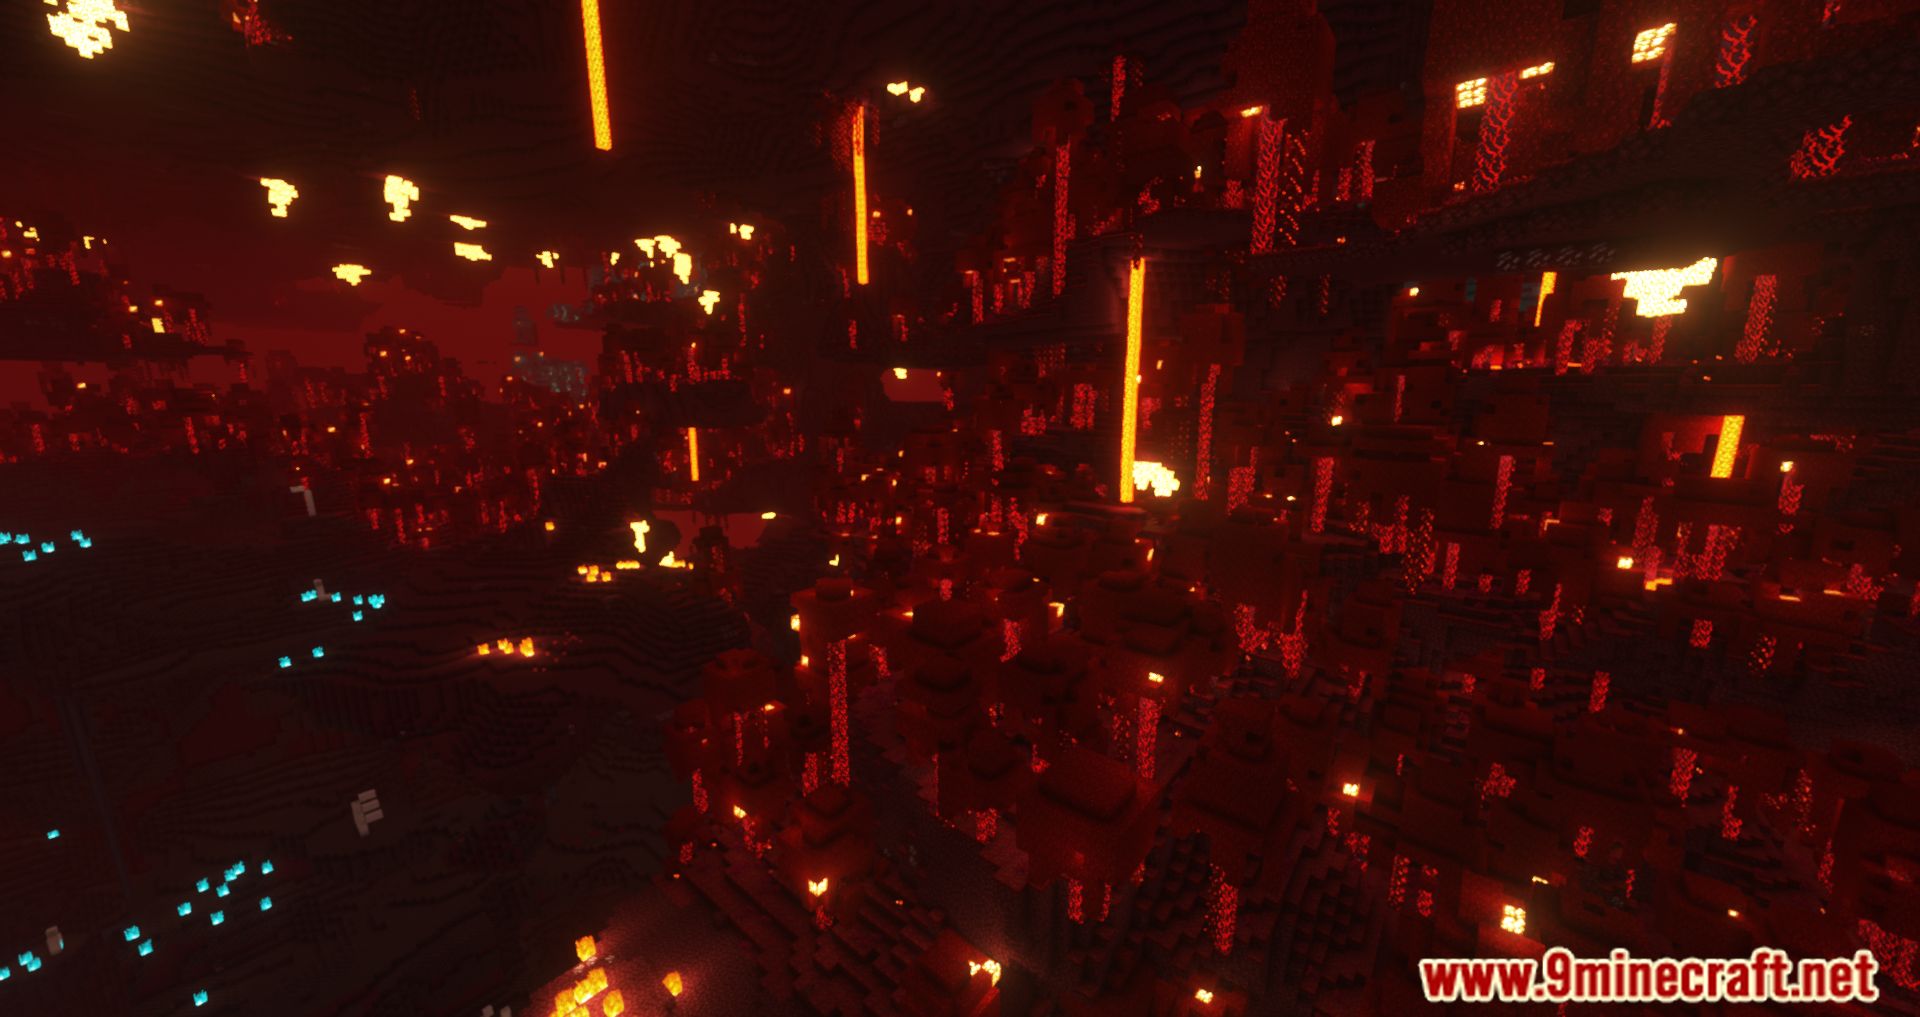 The Amplified Nether Minecraft Mod Is Insane 